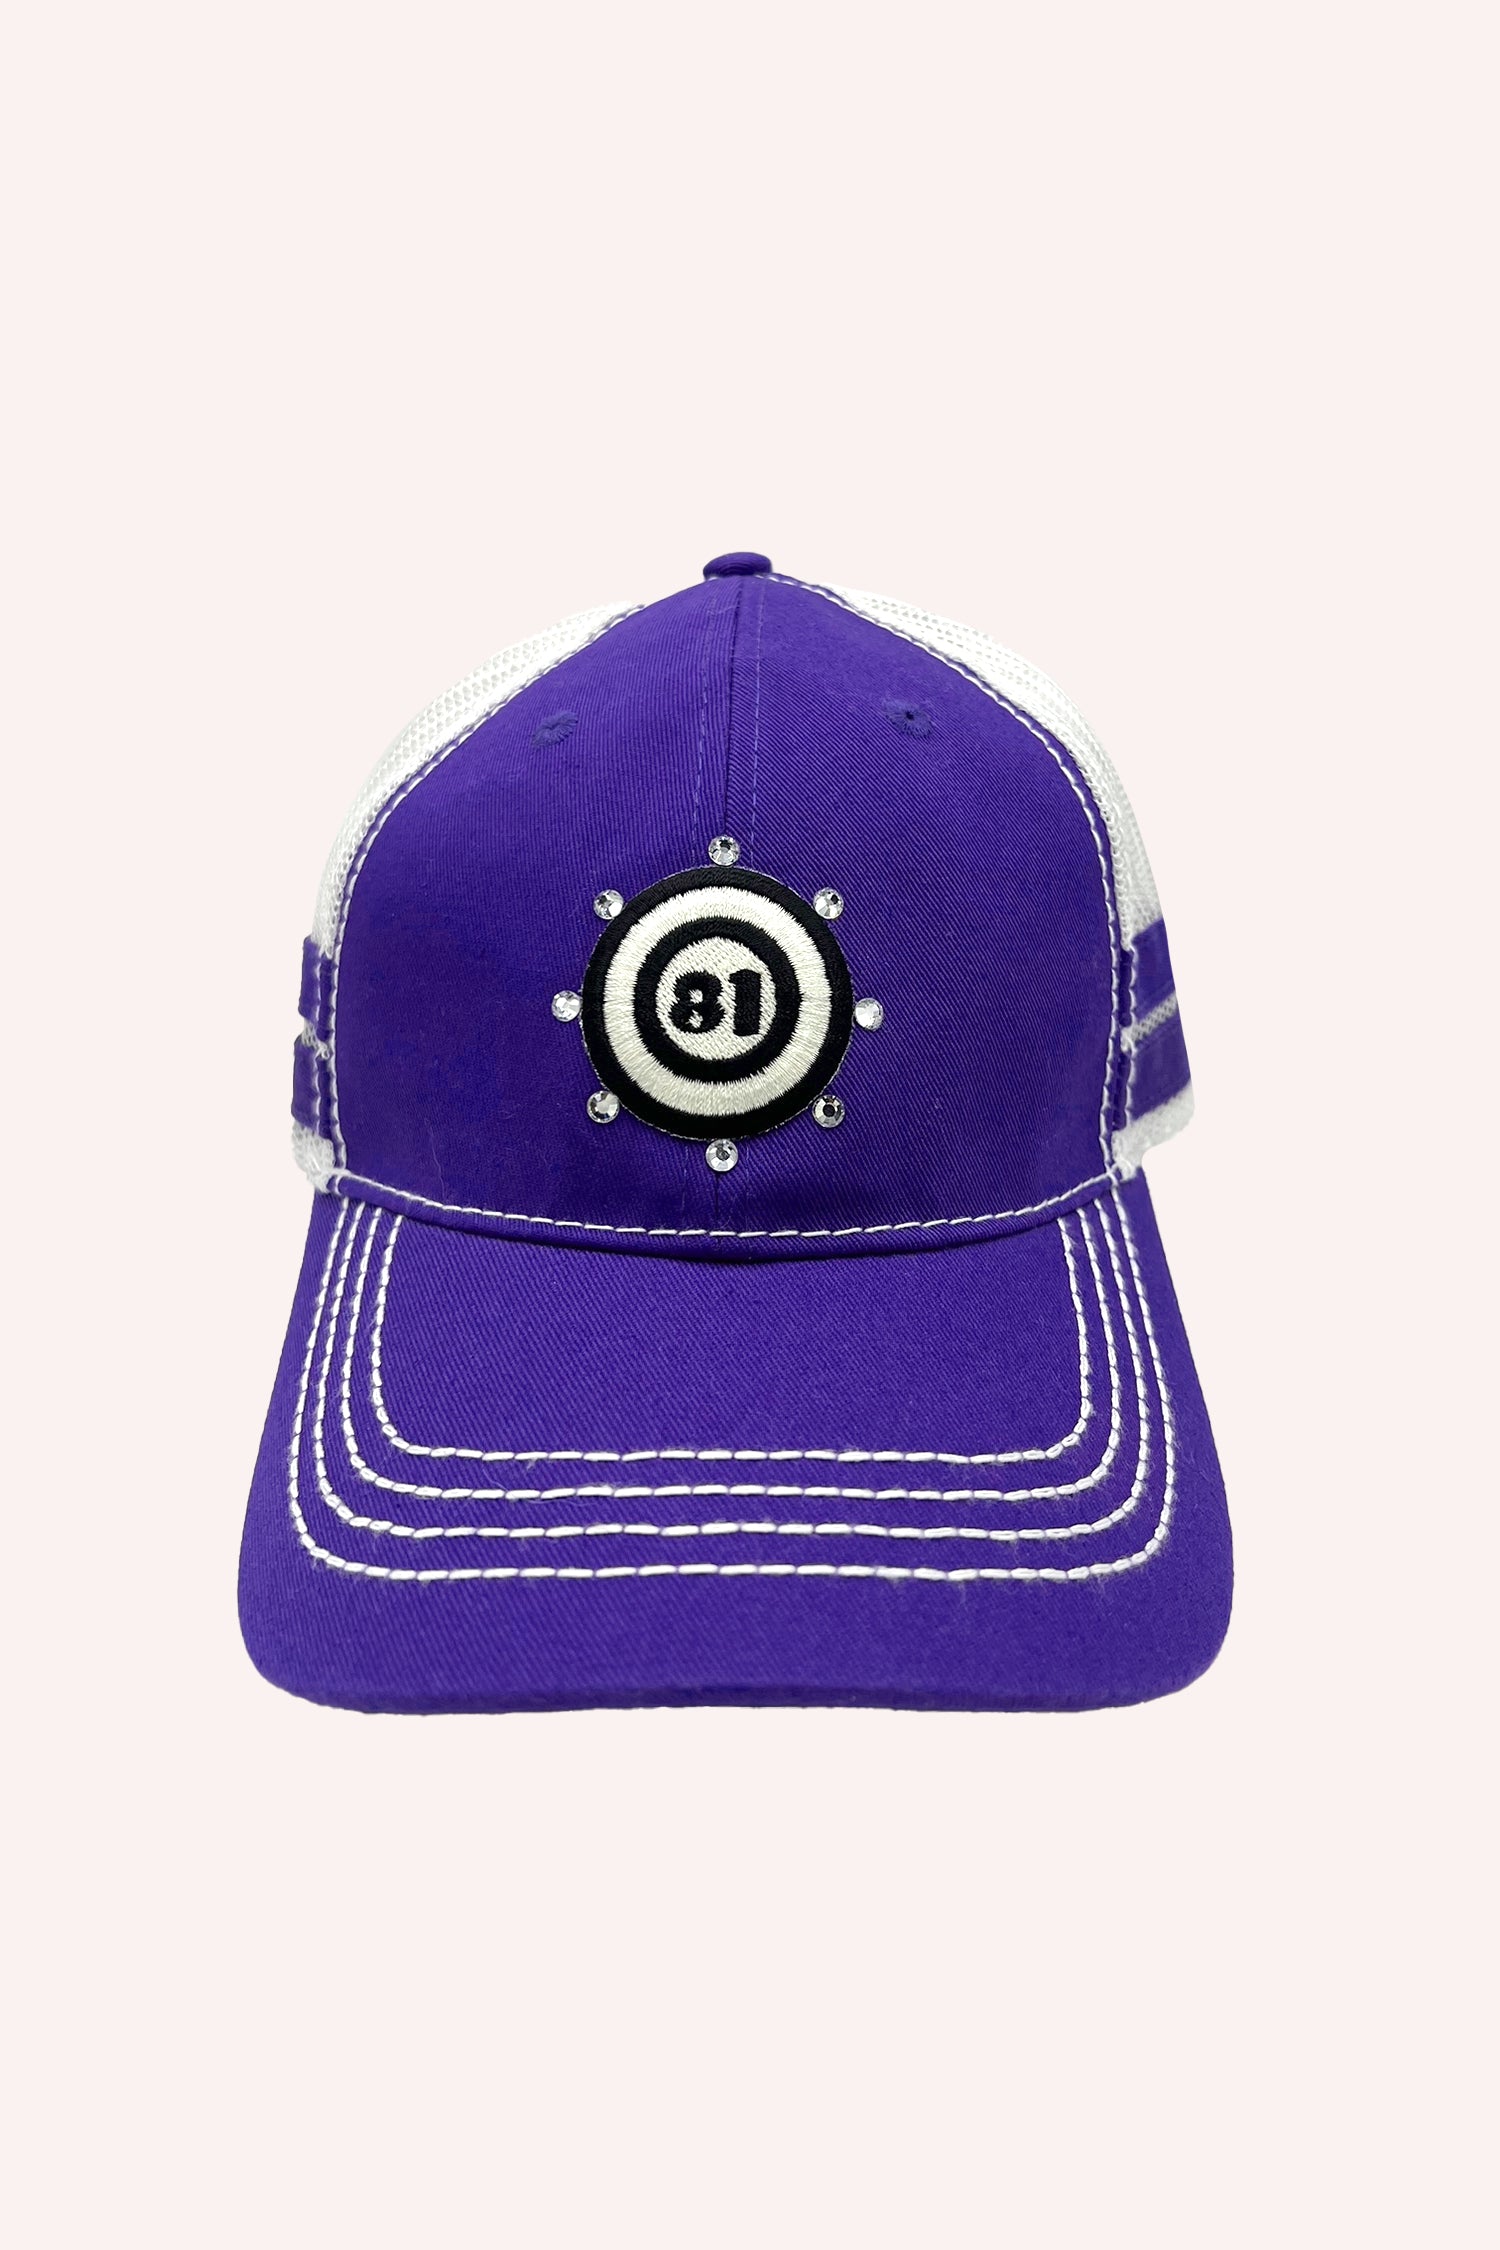 81 Trucker Hat Purple with white stiches, mesh on the back, label in a black and white round target, 8-clear bead around